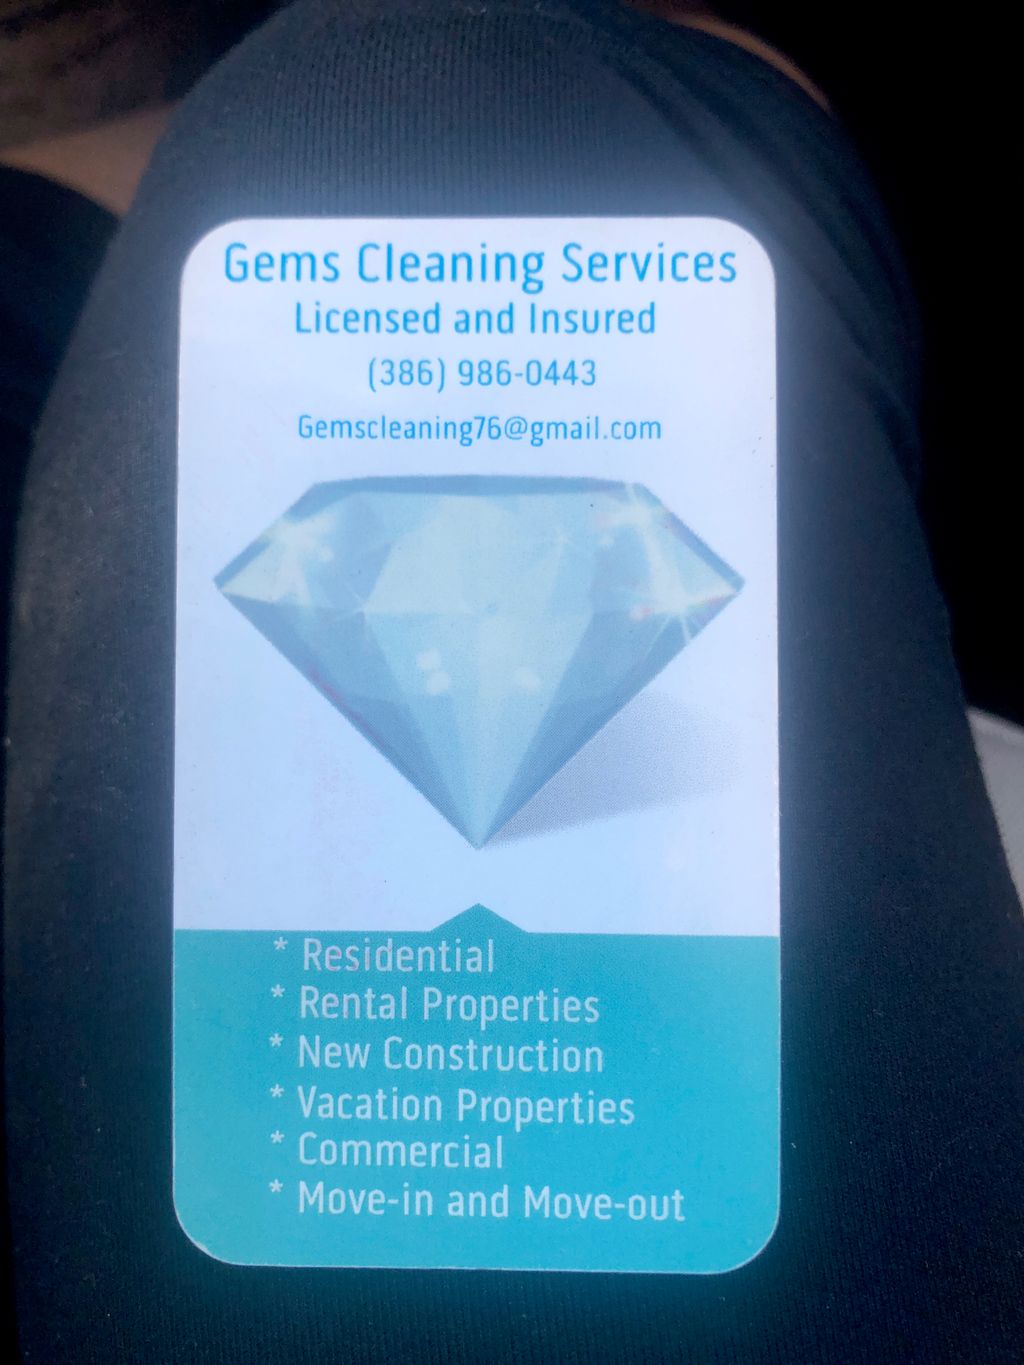 Gems Cleaning Services